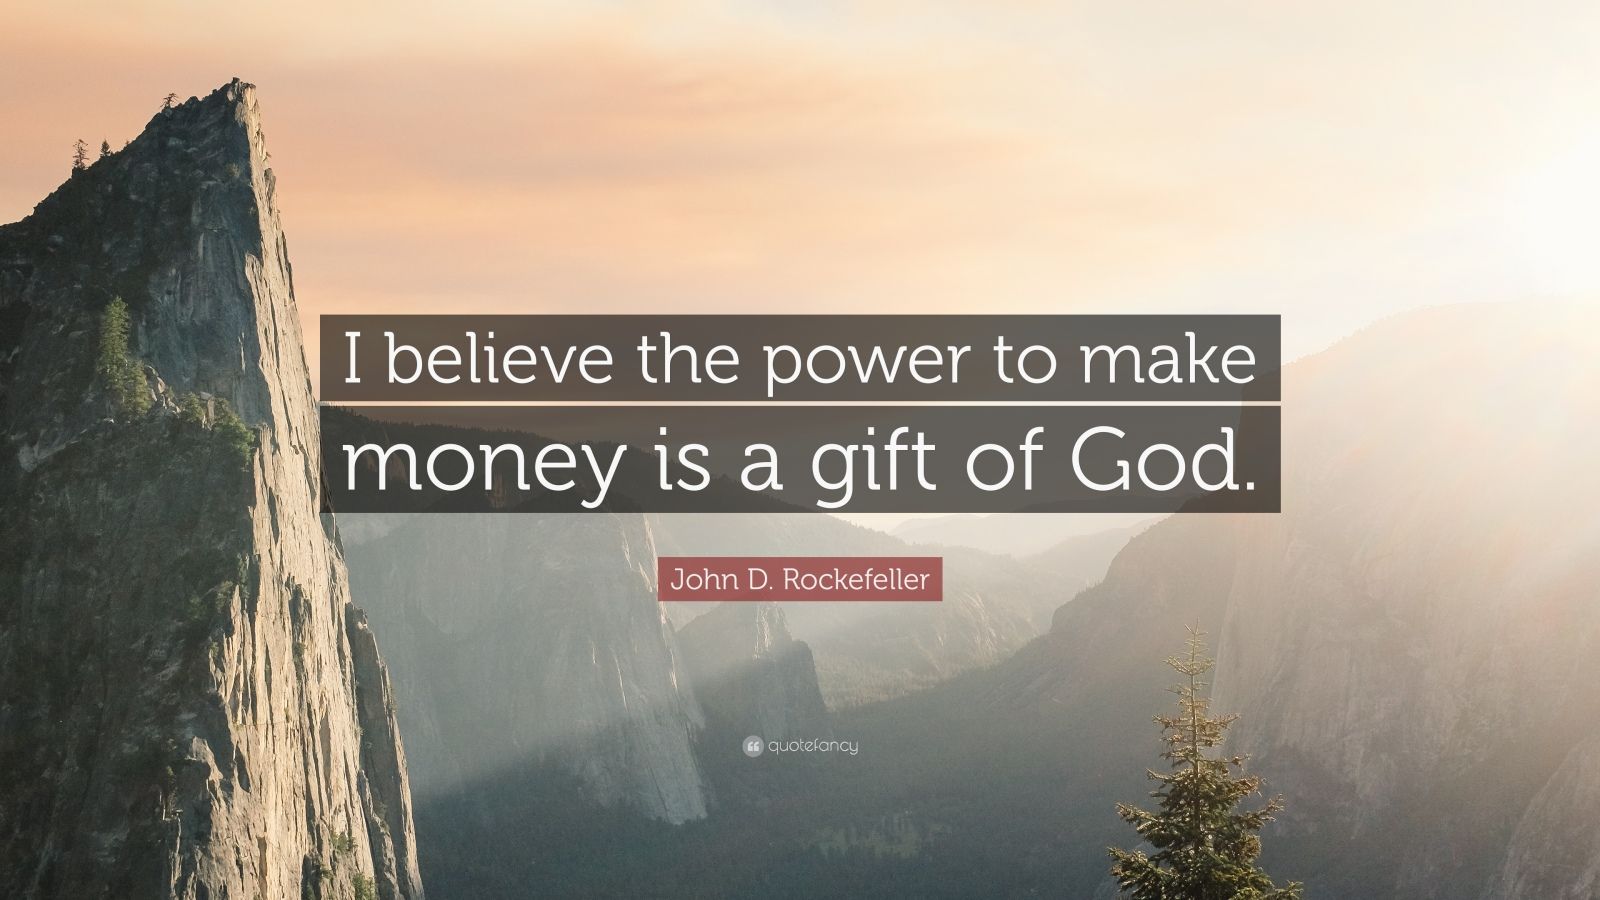 John D. Rockefeller Quote: “I believe the power to make money is a gift